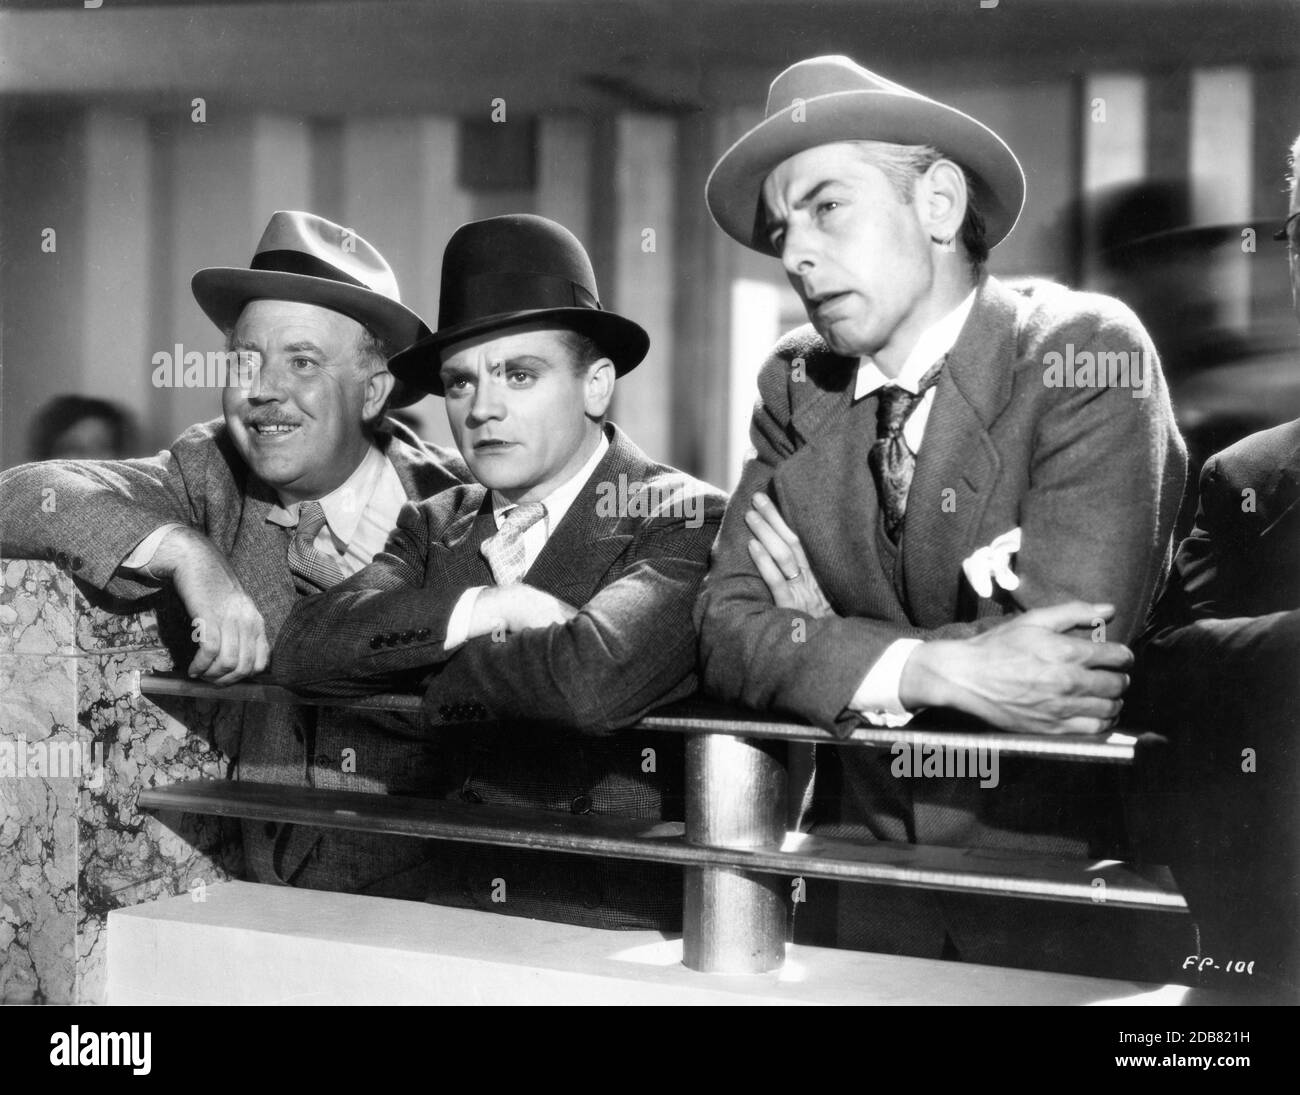 GUY KIBBEE JAMES CAGNEY and ARTHUR HOHL in FOOTLIGHT PARADE 1933 ...